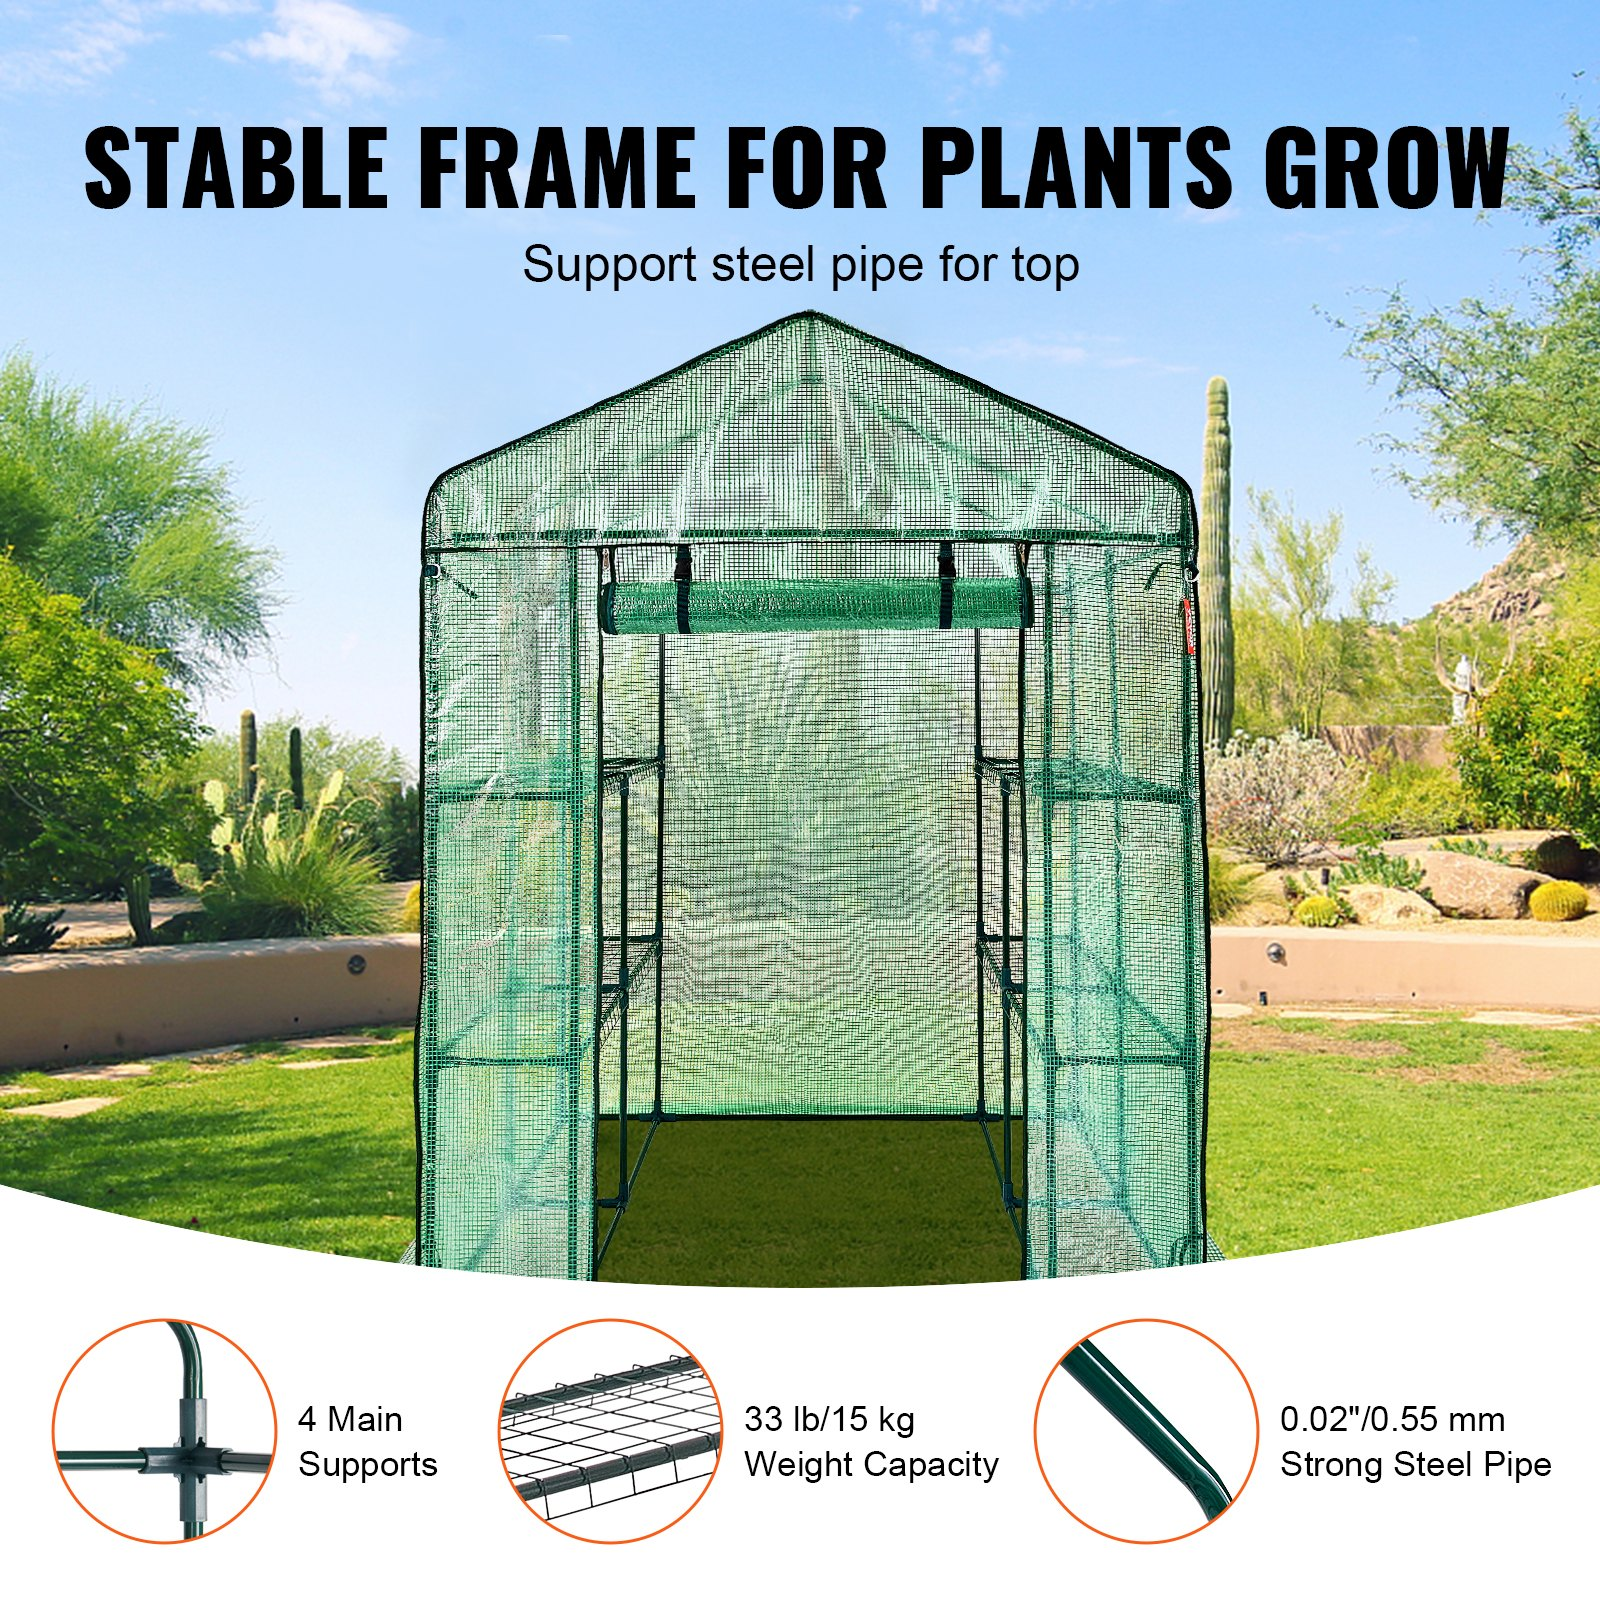 VEVOR Walk-in Green House, 4.6 x 4.6 x 6.6 ft , Greenhouse with Shelves, High Strength PE Cover with Zipper Door and Steel Frame, Assembly in Minutes, Suitable for Planting and Storage, Goodies N Stuff